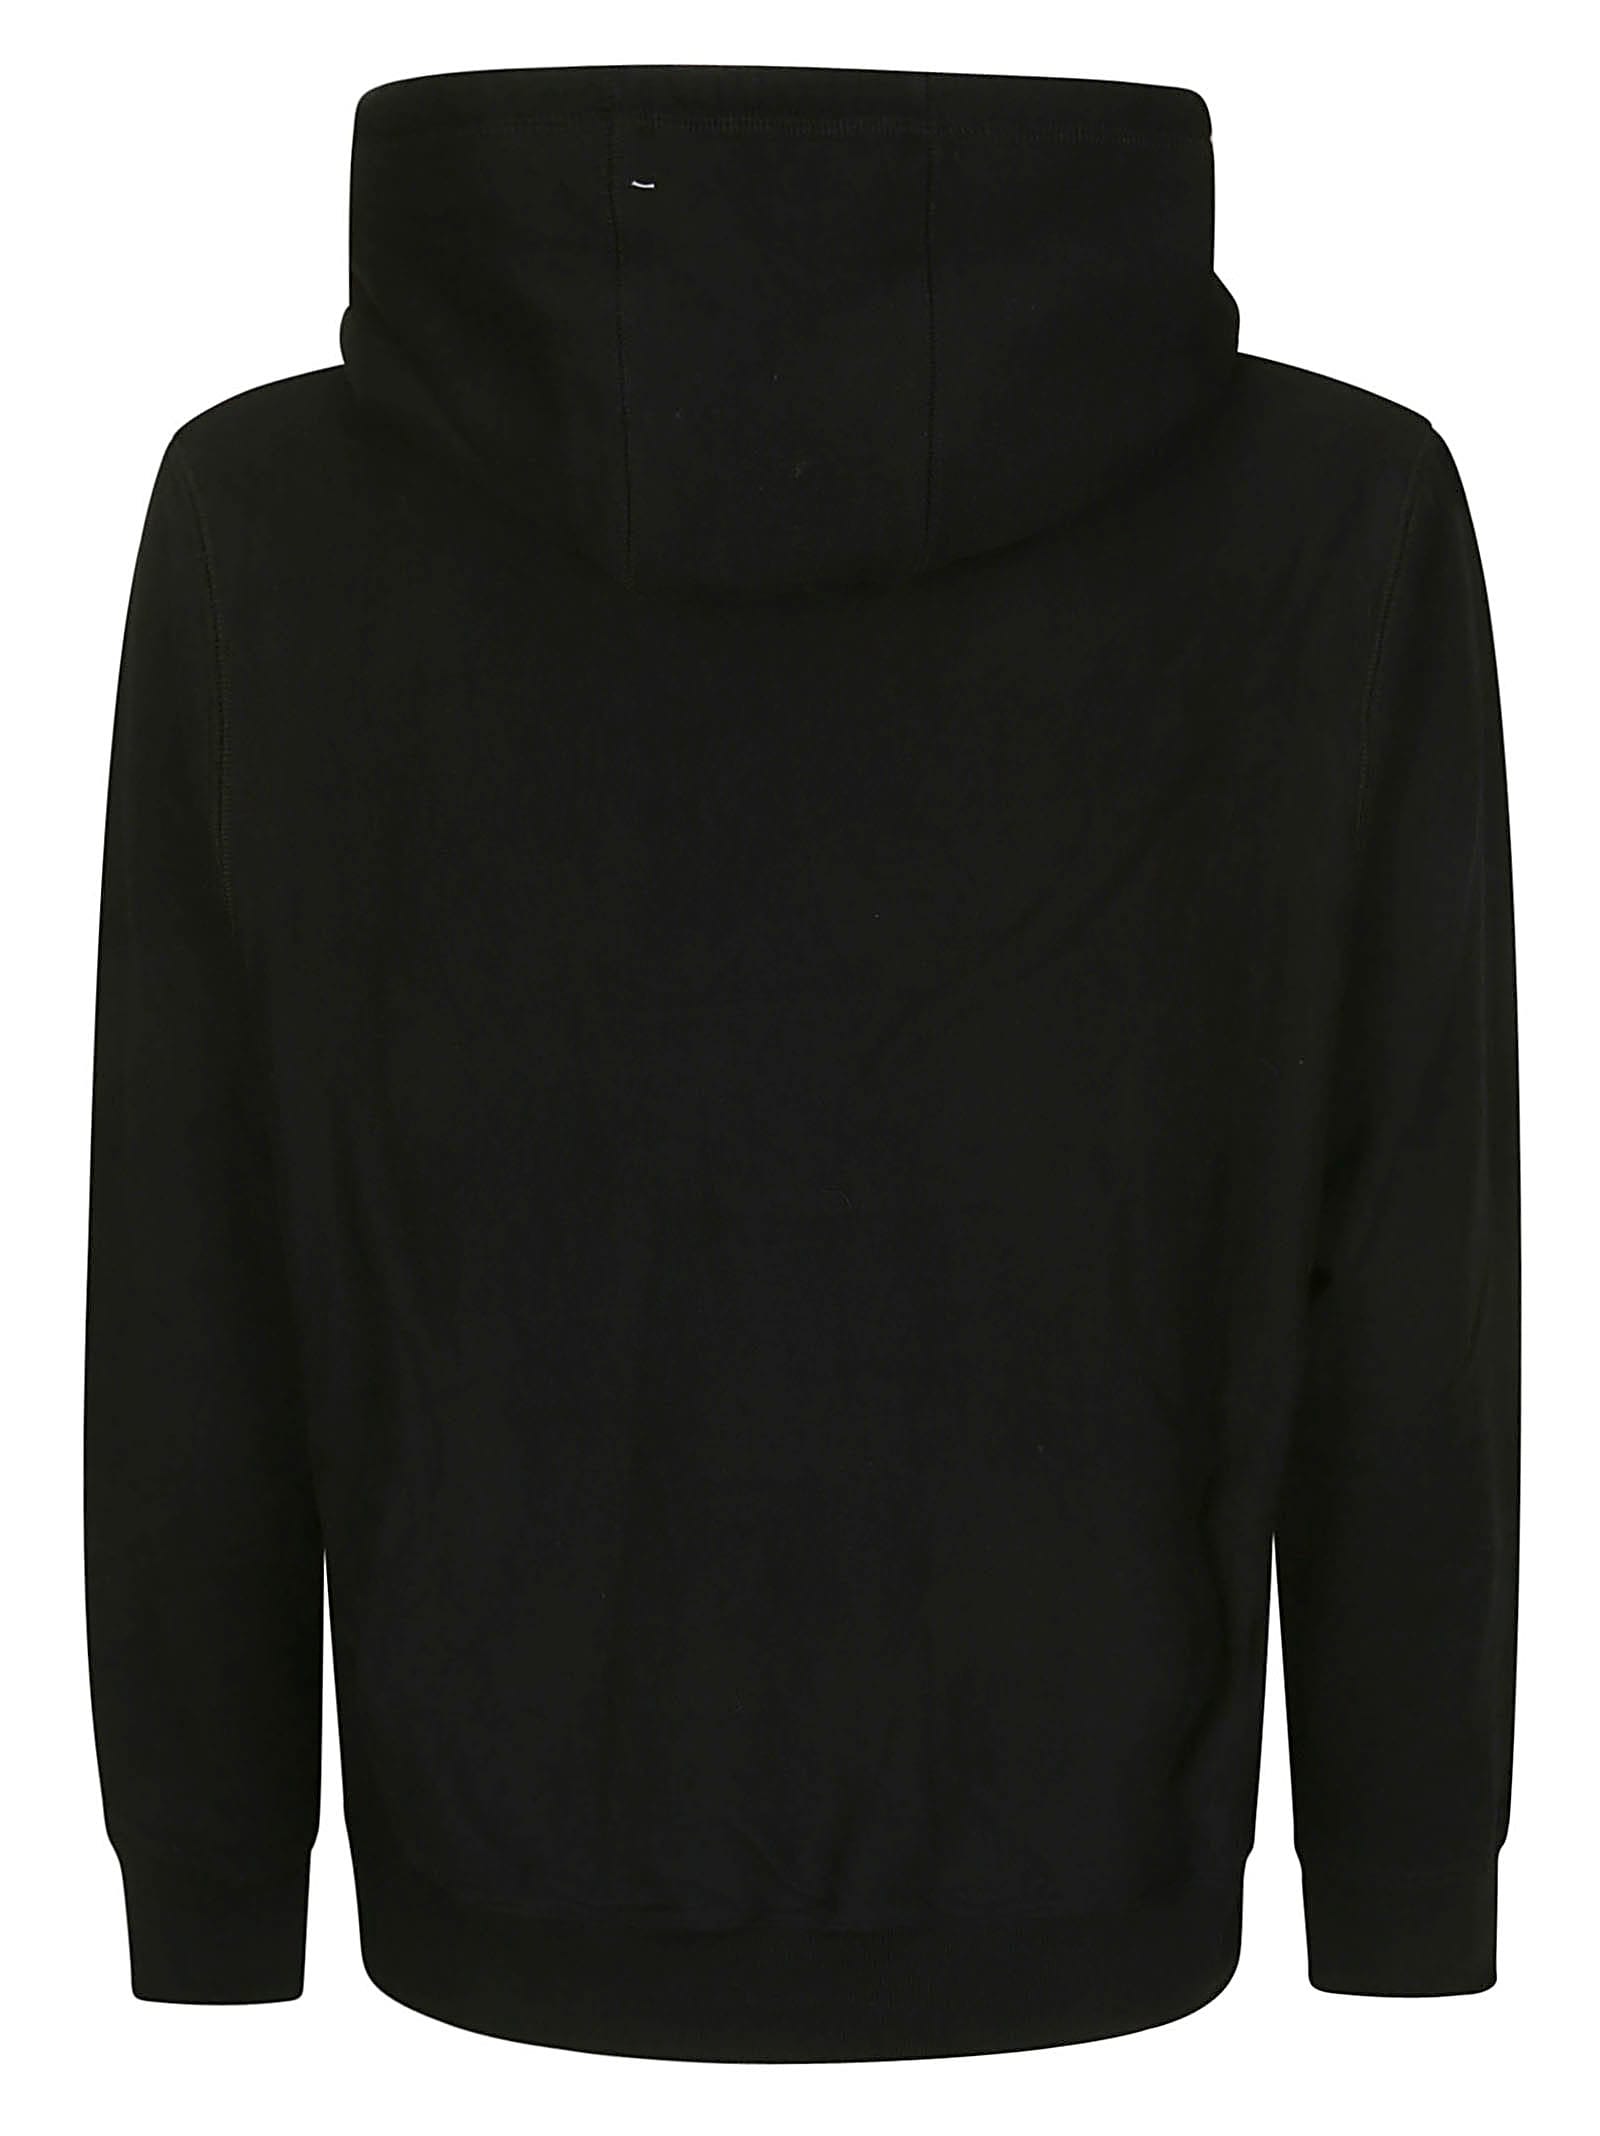 Shop Billionaire Boys Club Heart And Mind Popover Hood In Black